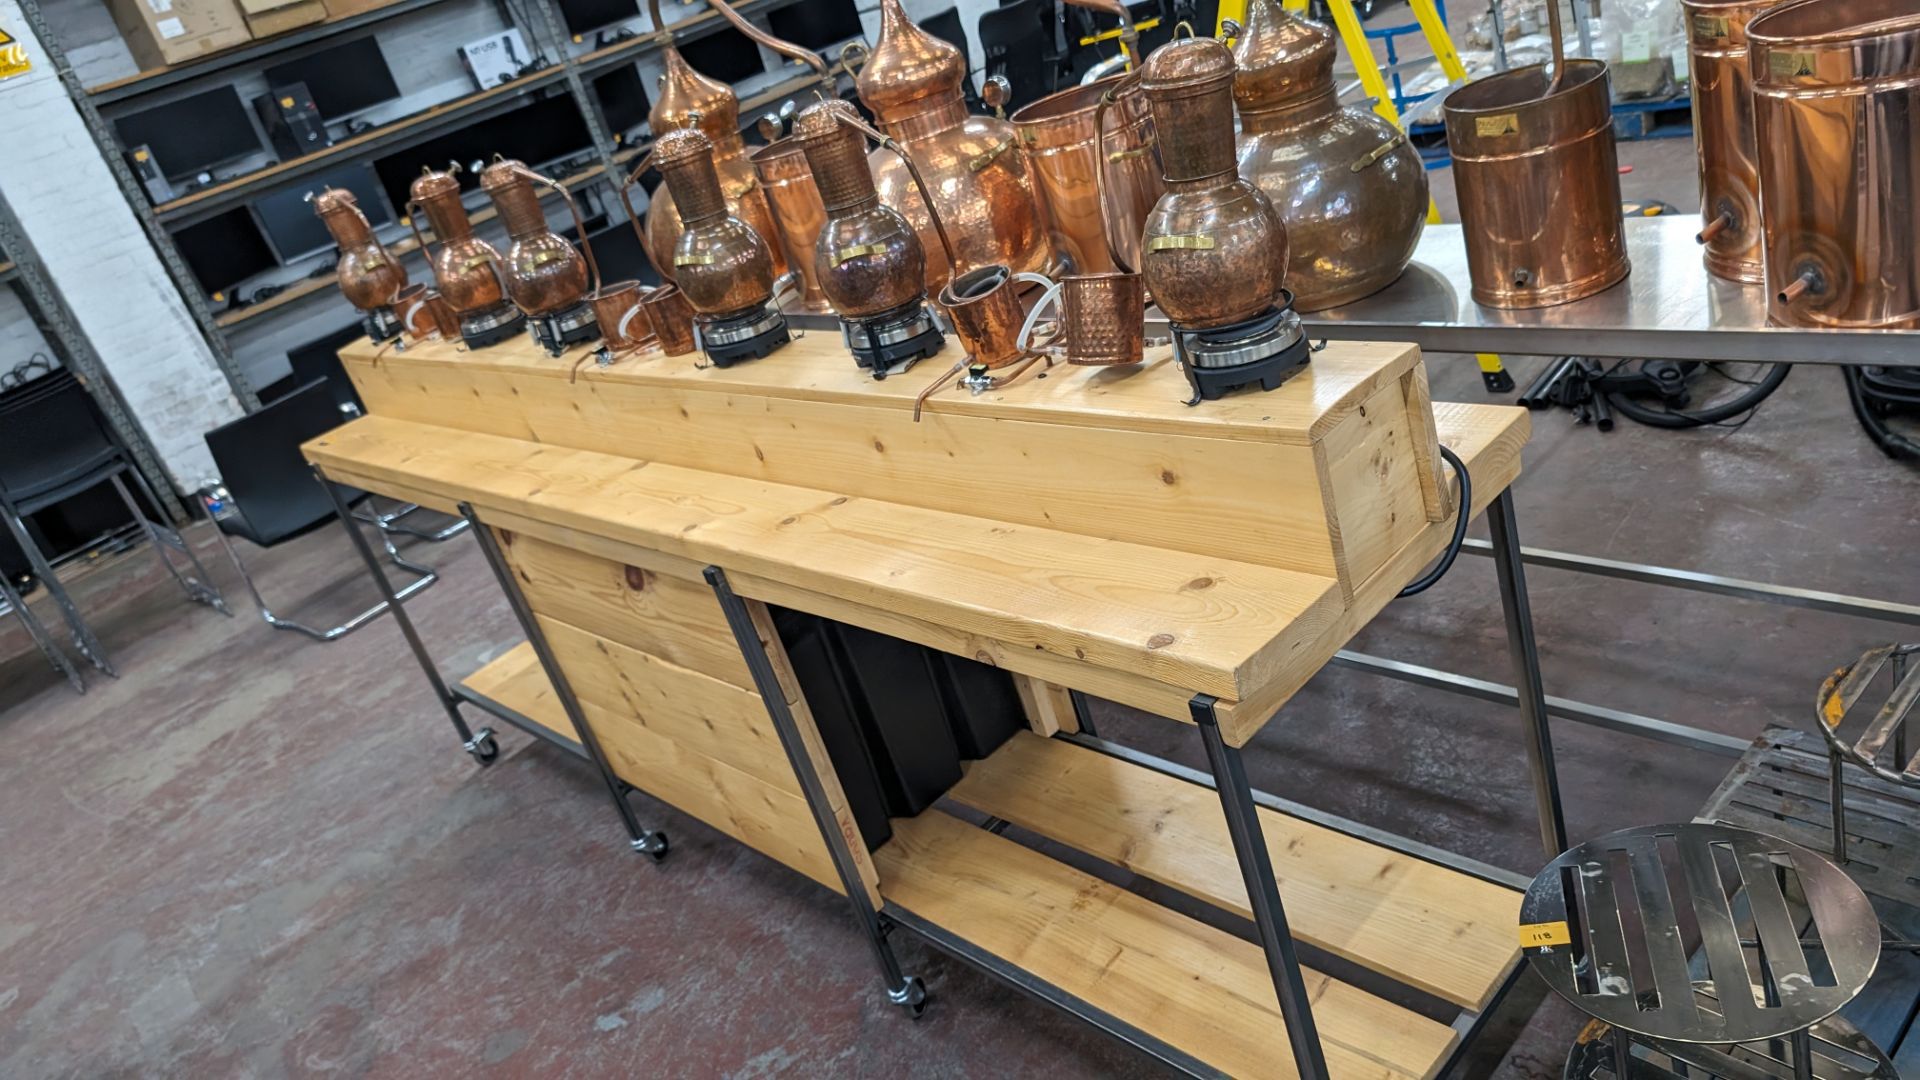 6 off small stills plus mobile bench. This lot comprises a custom made mobile bench with a metal fr